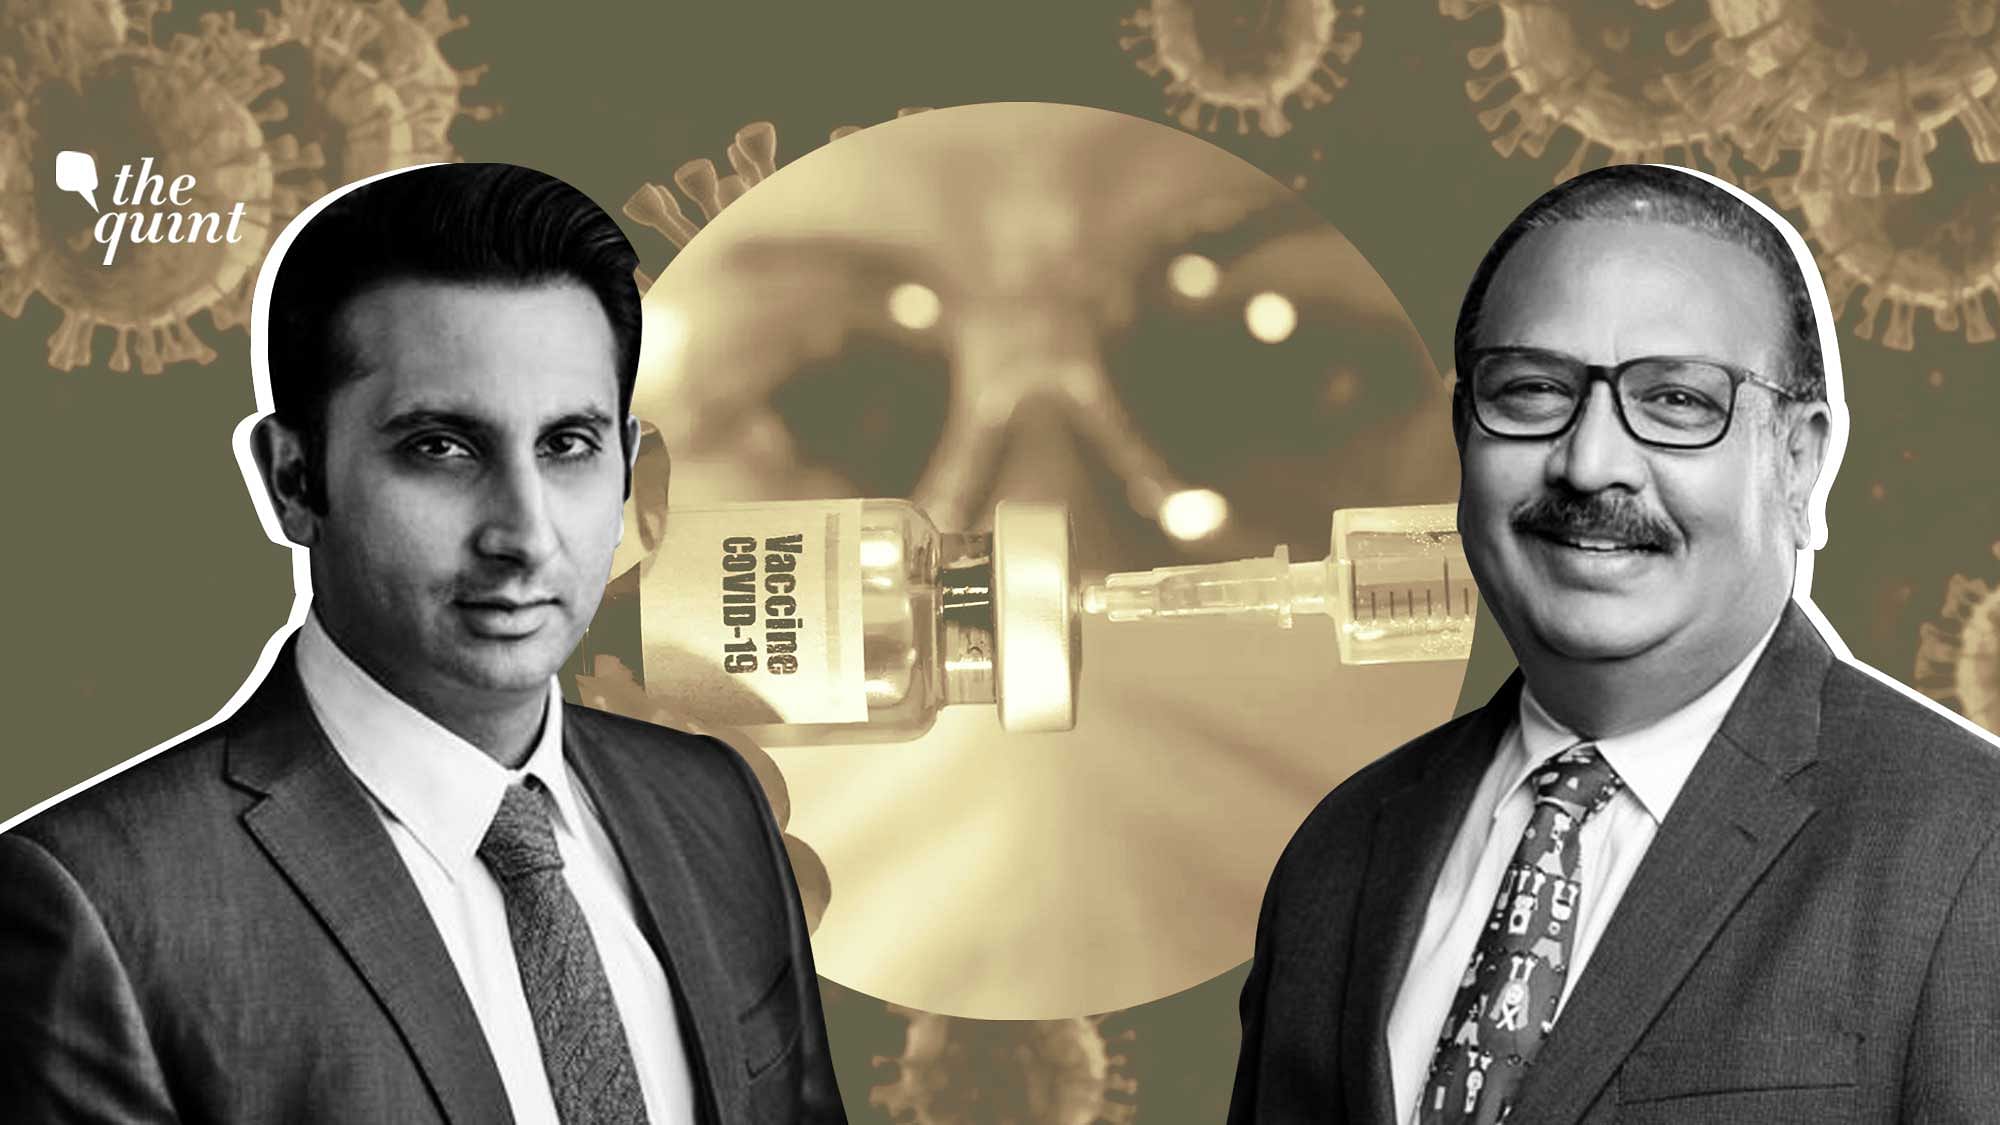 Serum Institute of India was founded in 1966 while Bharat Biotech started in 1996 by Krishna M. Ella and his wife.&nbsp;